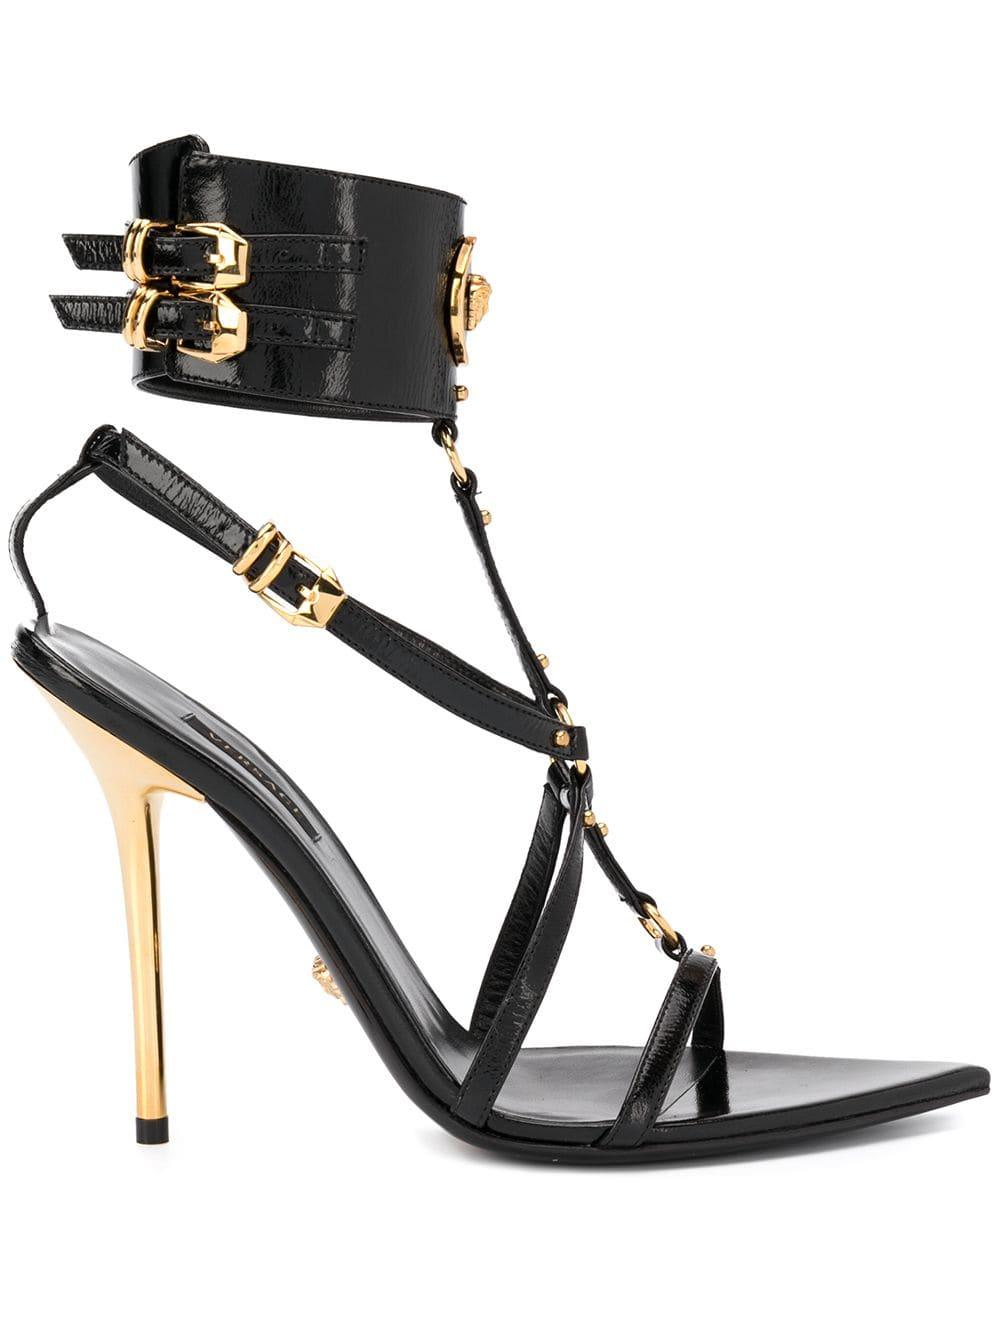 Versace Leather Medusa Strappy Sandals in Black - Lyst